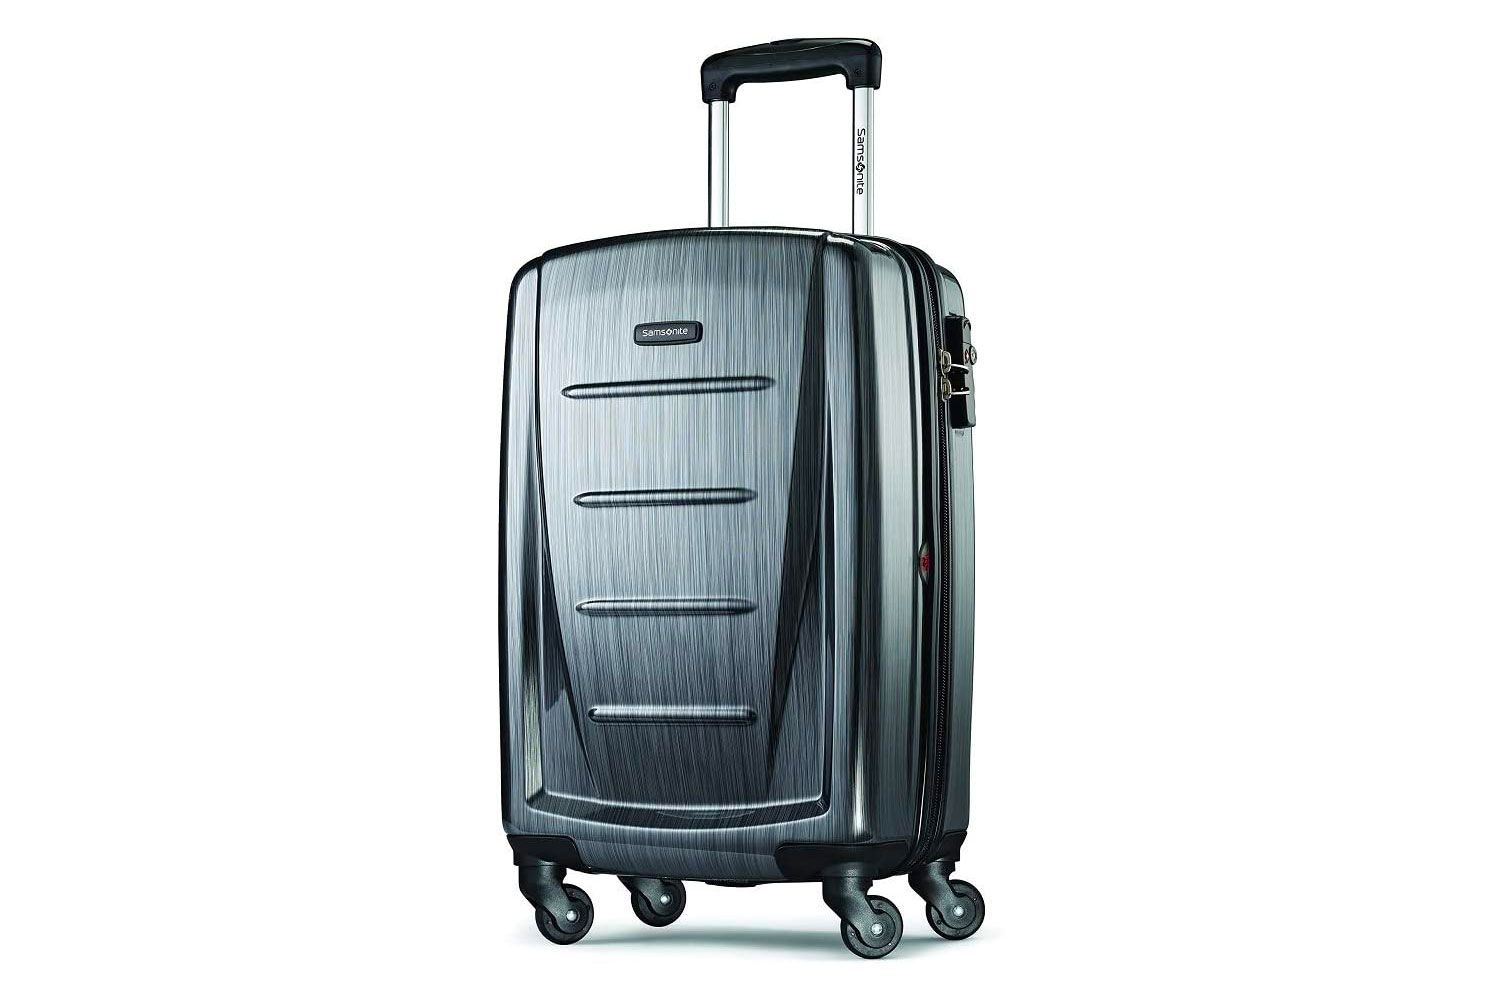 Samsonite Winfield 2 Hardside Luggage with Spinner Wheels, Charcoal